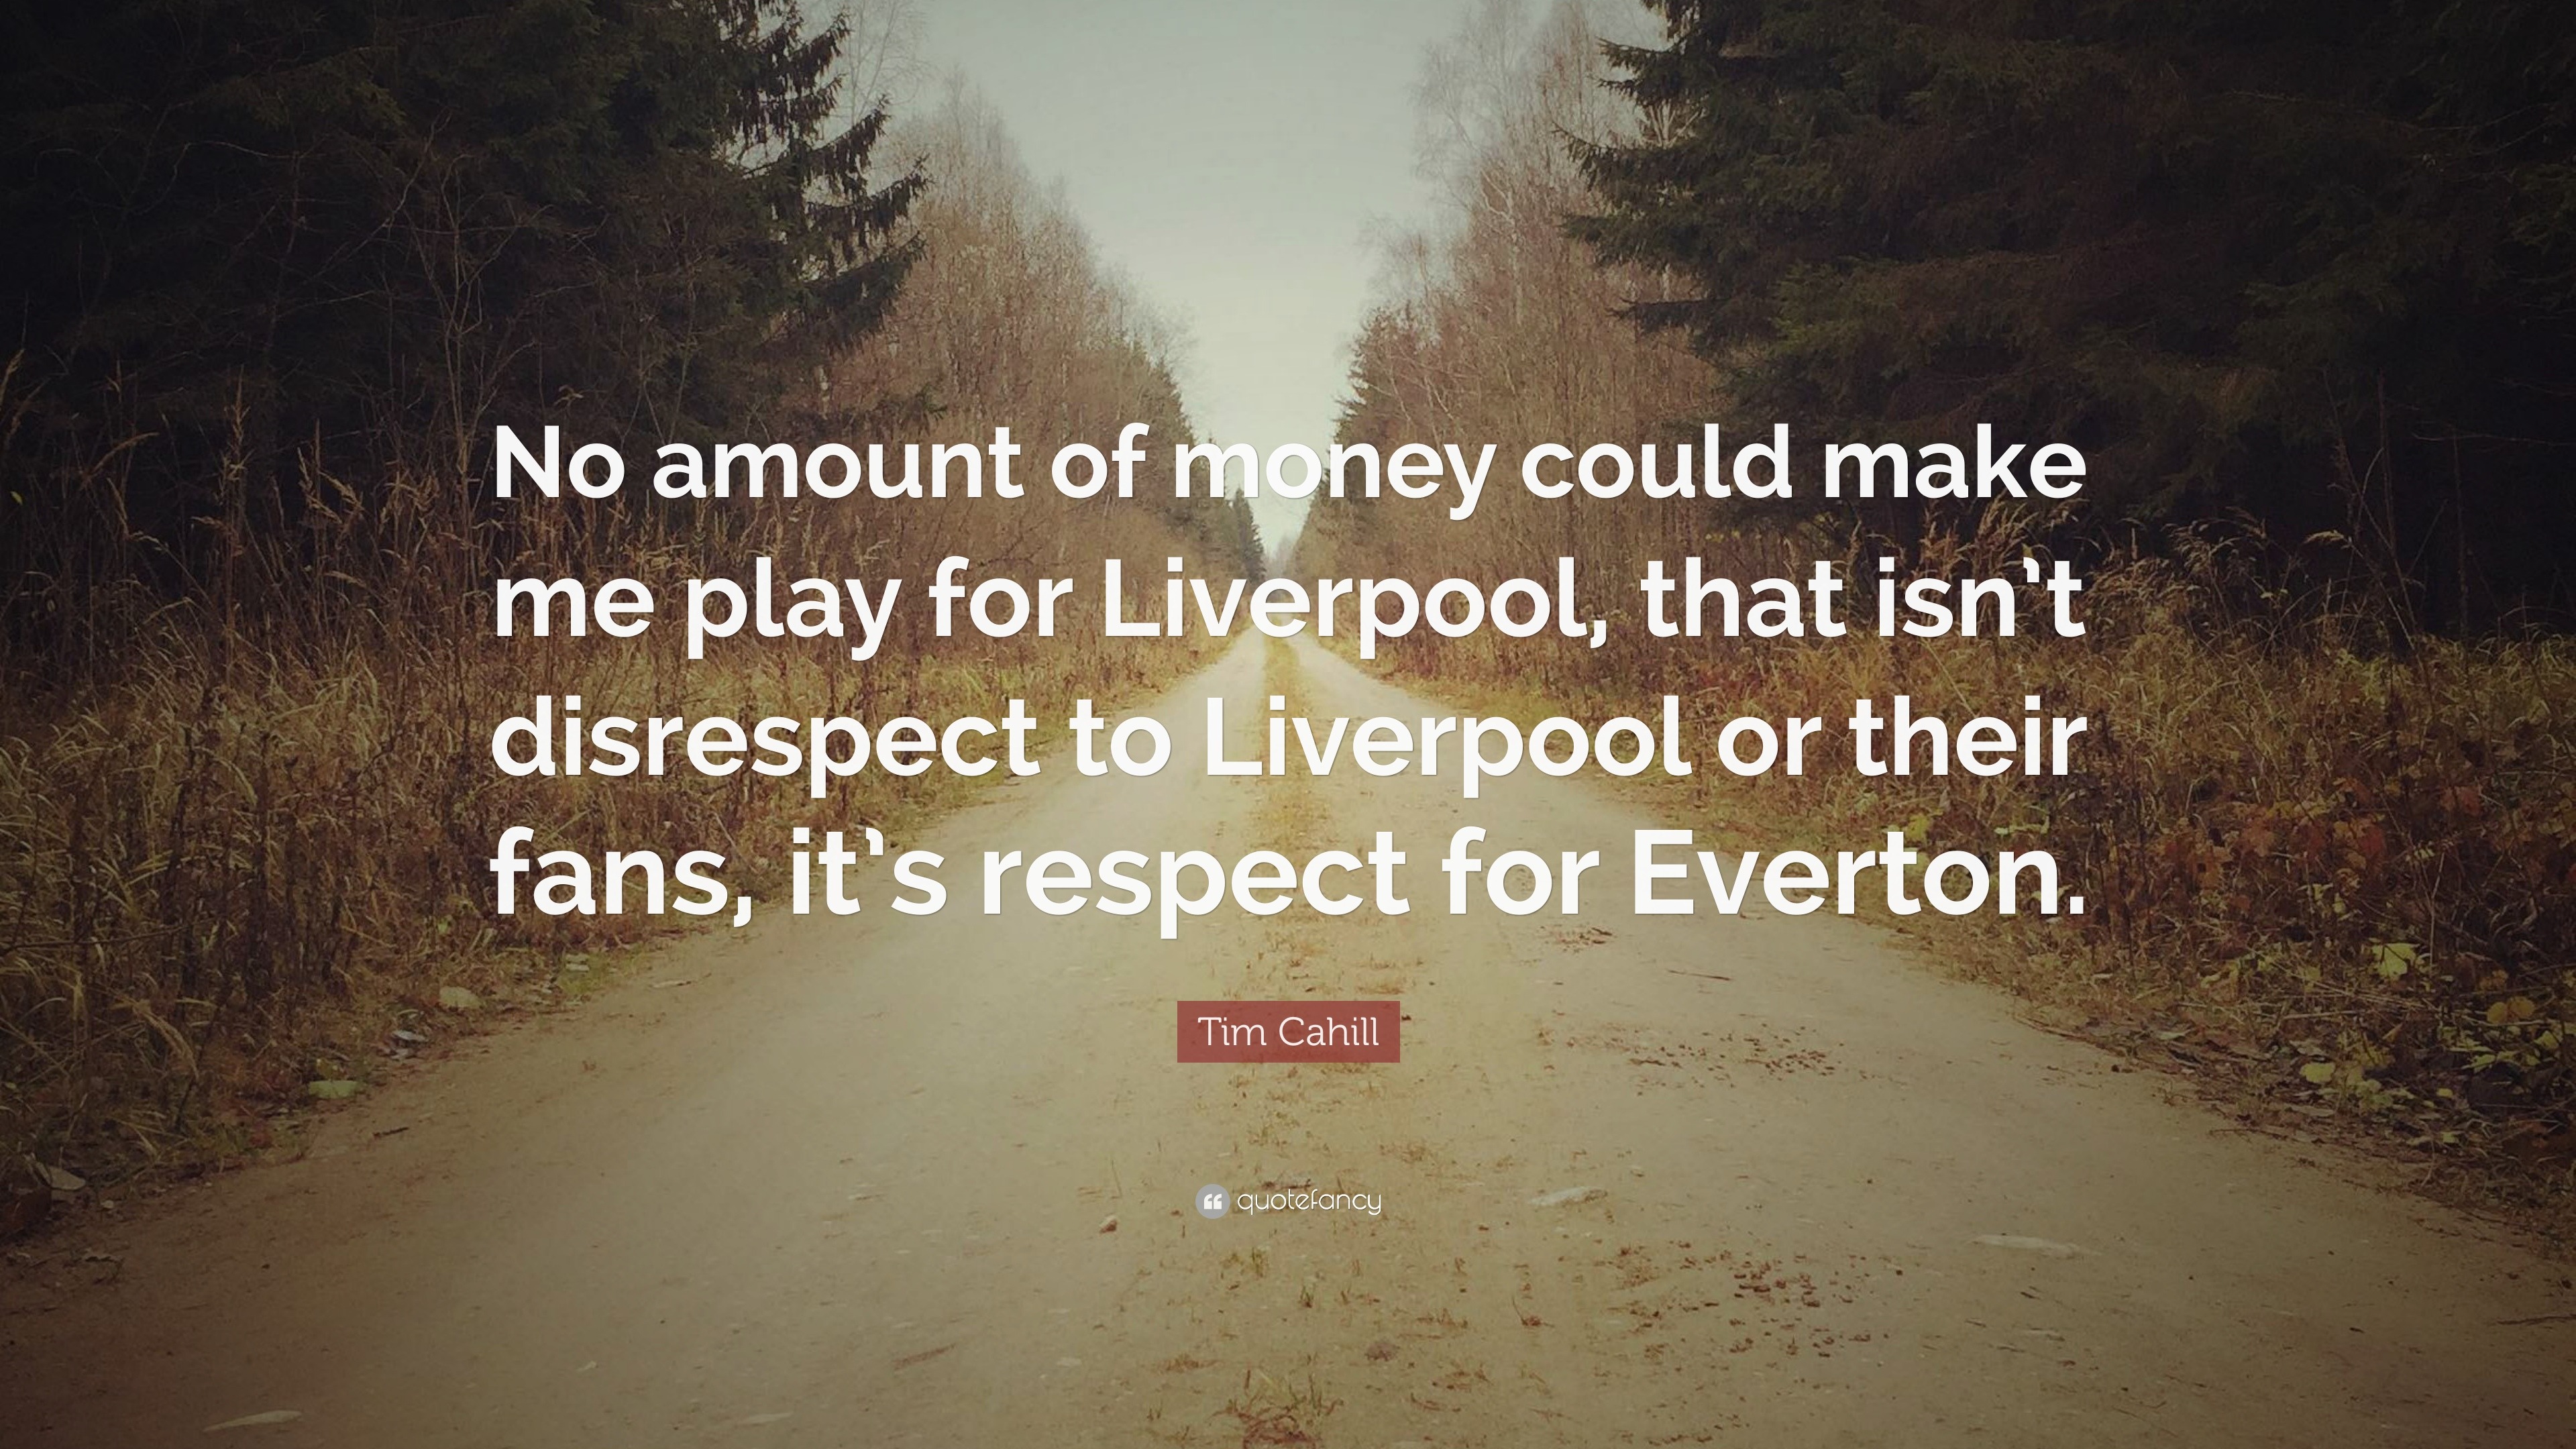 Tim Cahill Quote: “No amount of money could make me play for Liverpool ...